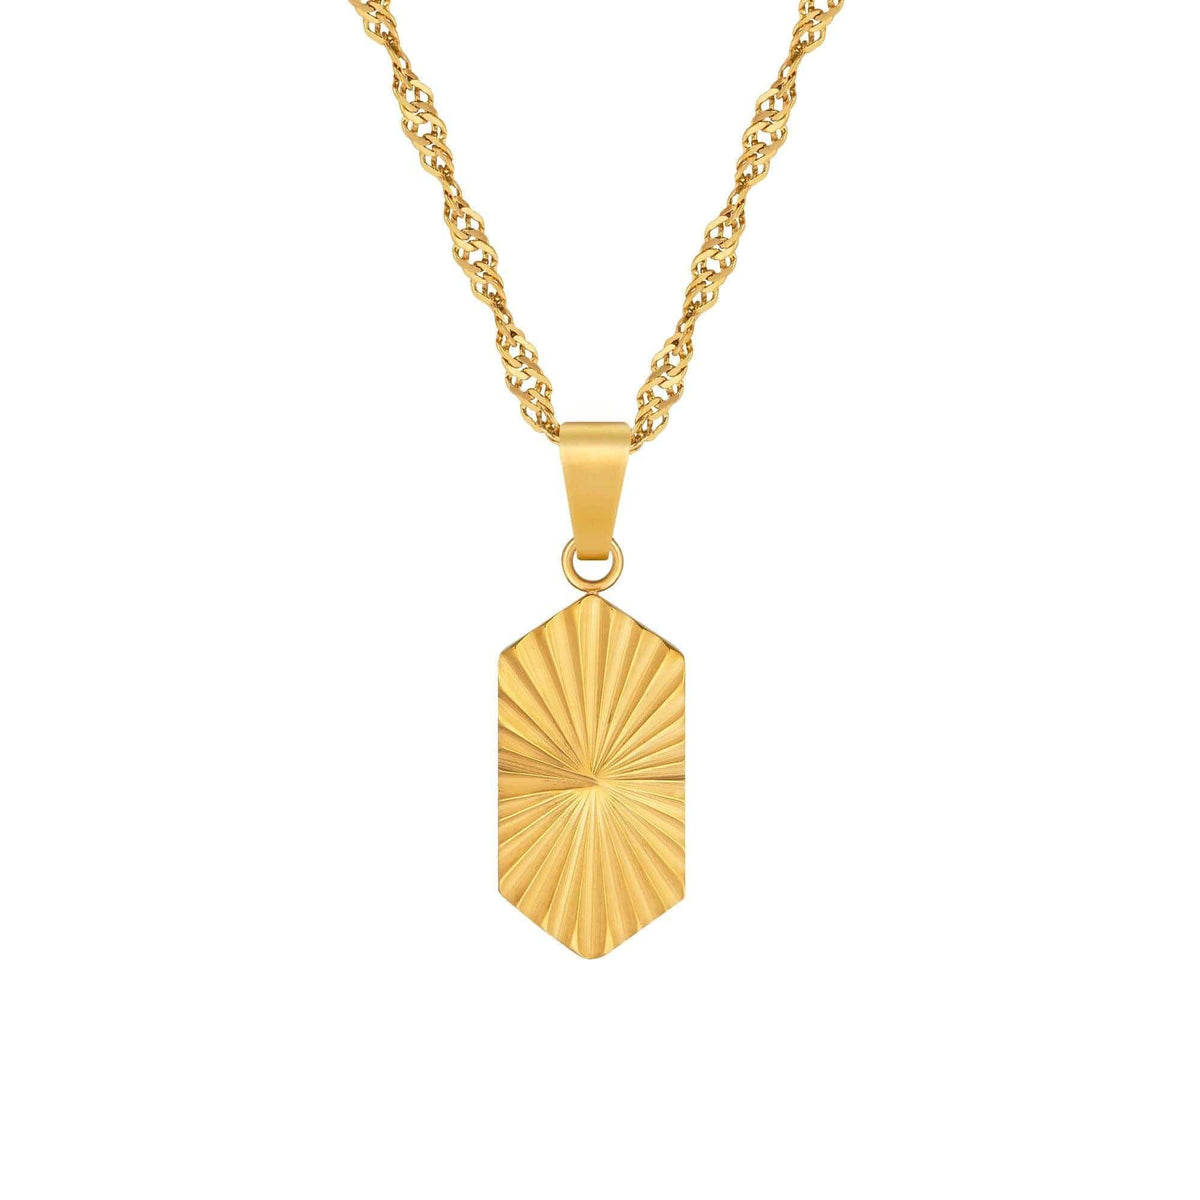 BohoMoon Stainless Steel Promises Necklace Gold